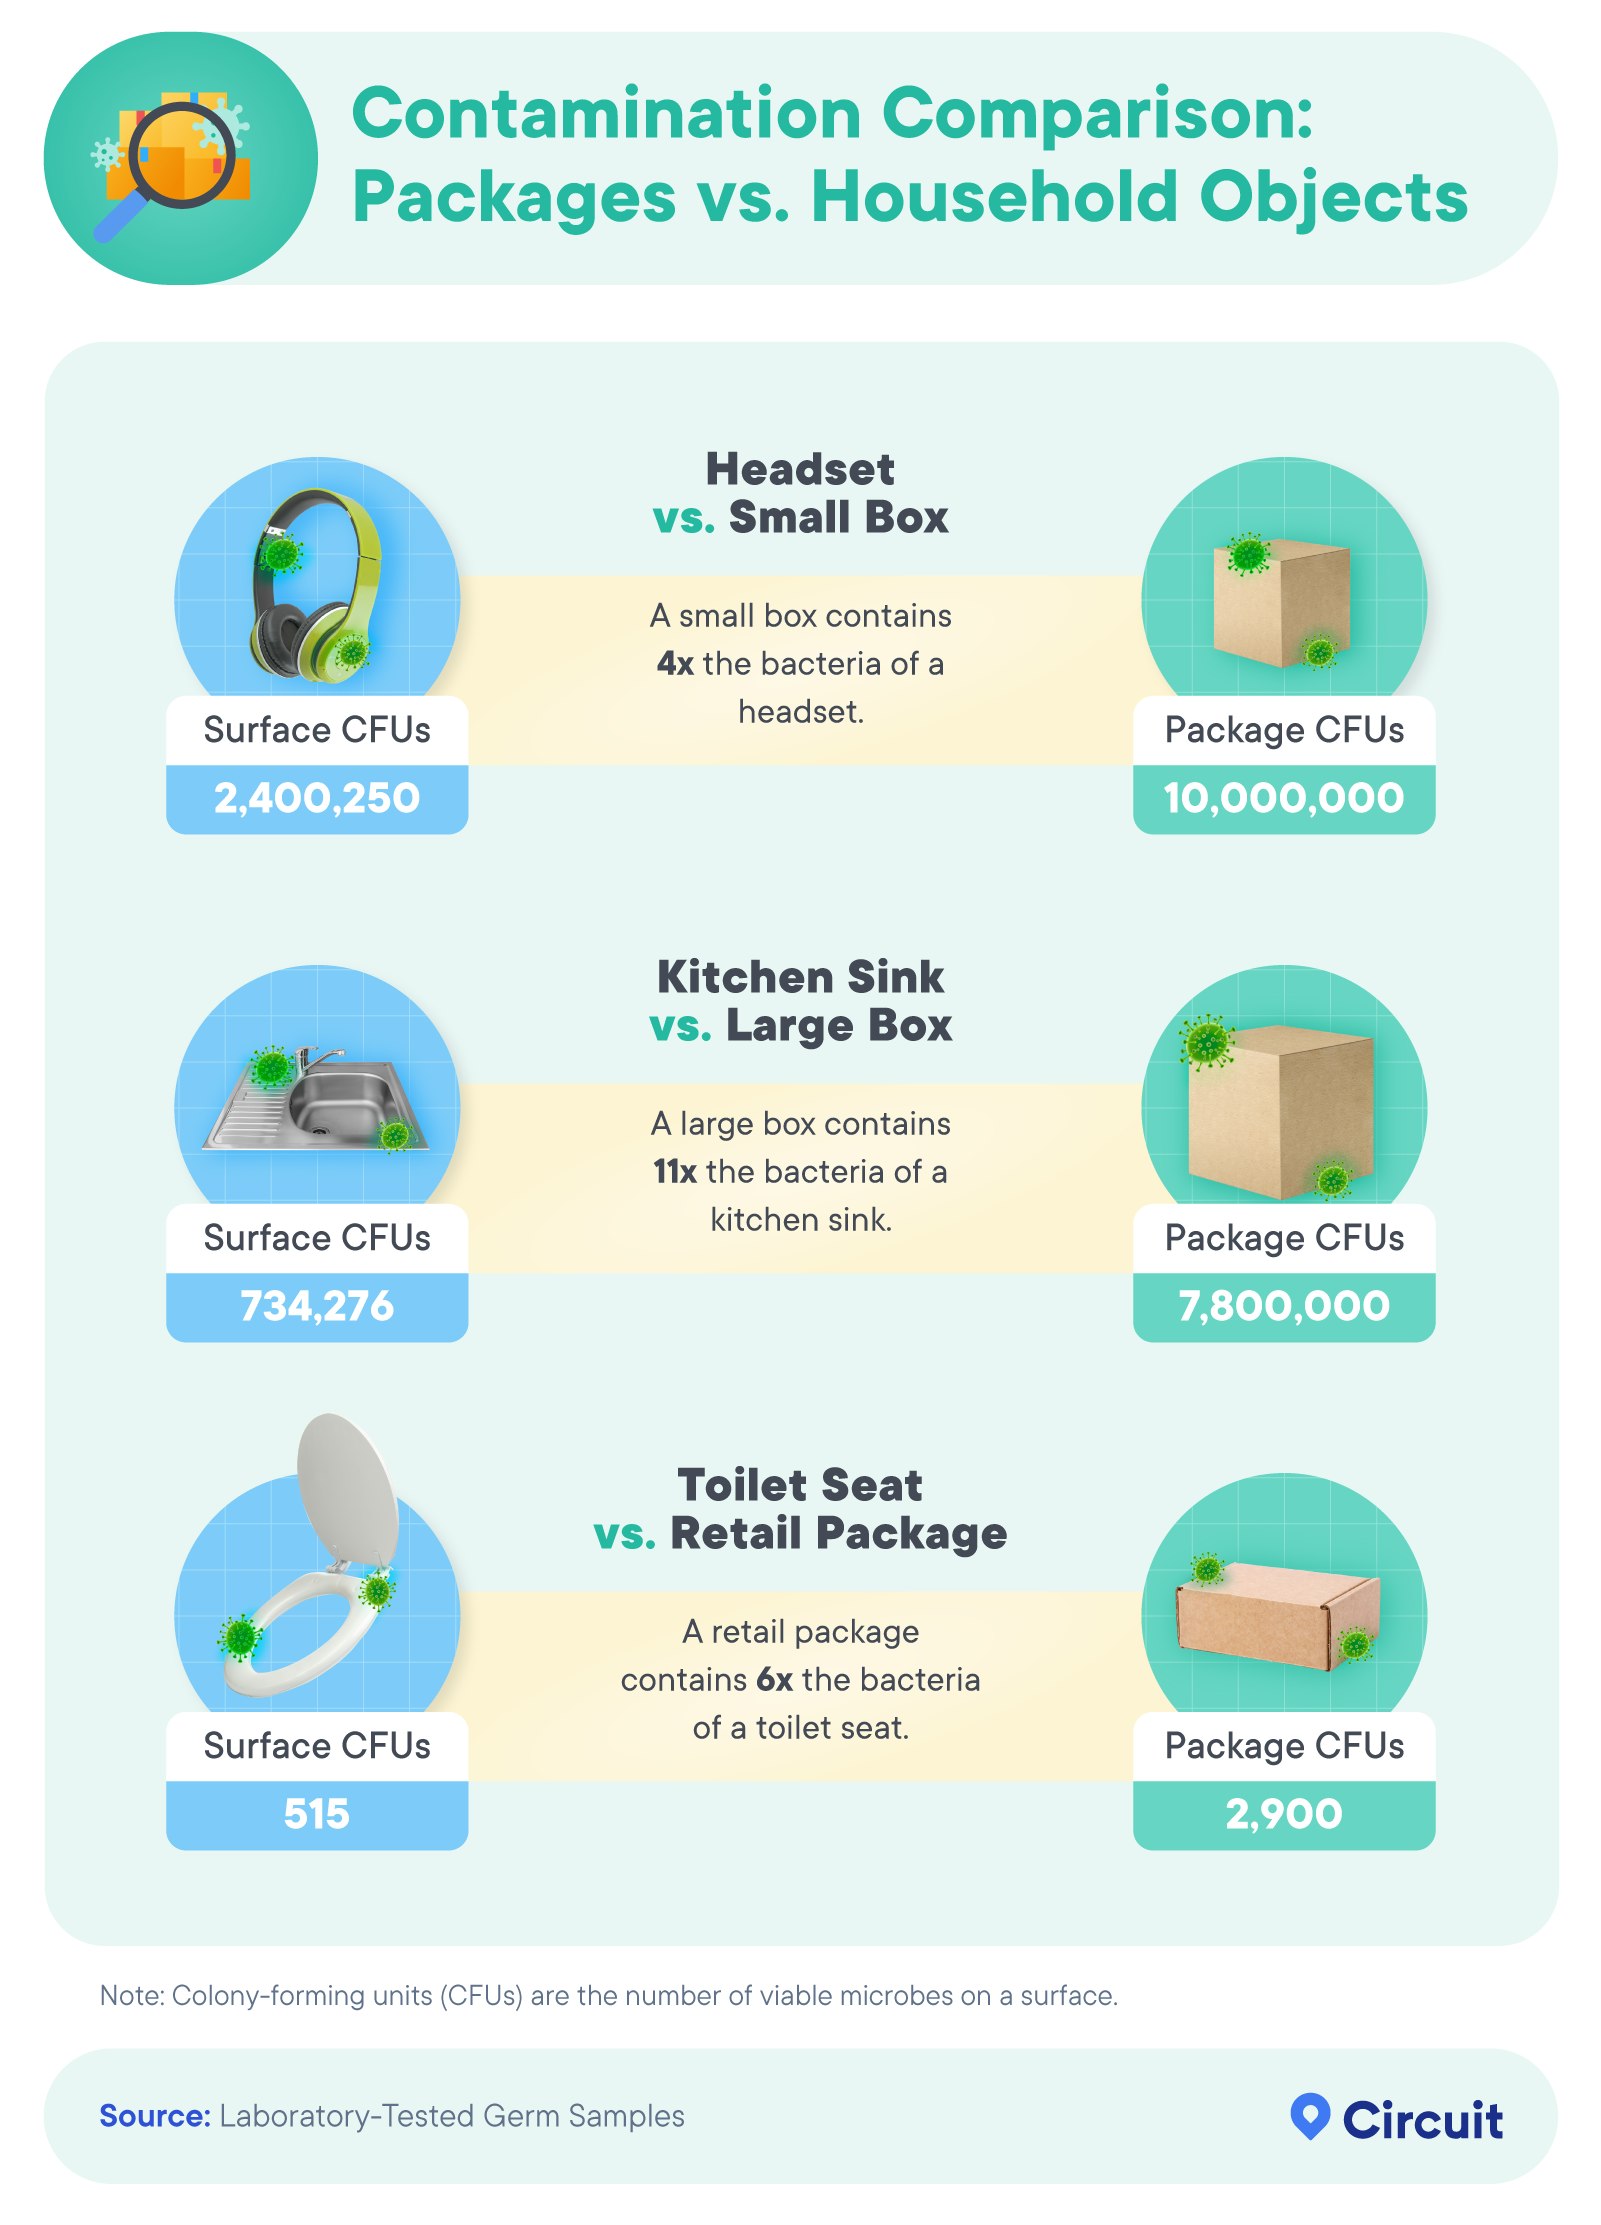 Contamination comparison of packages vs. household objects.